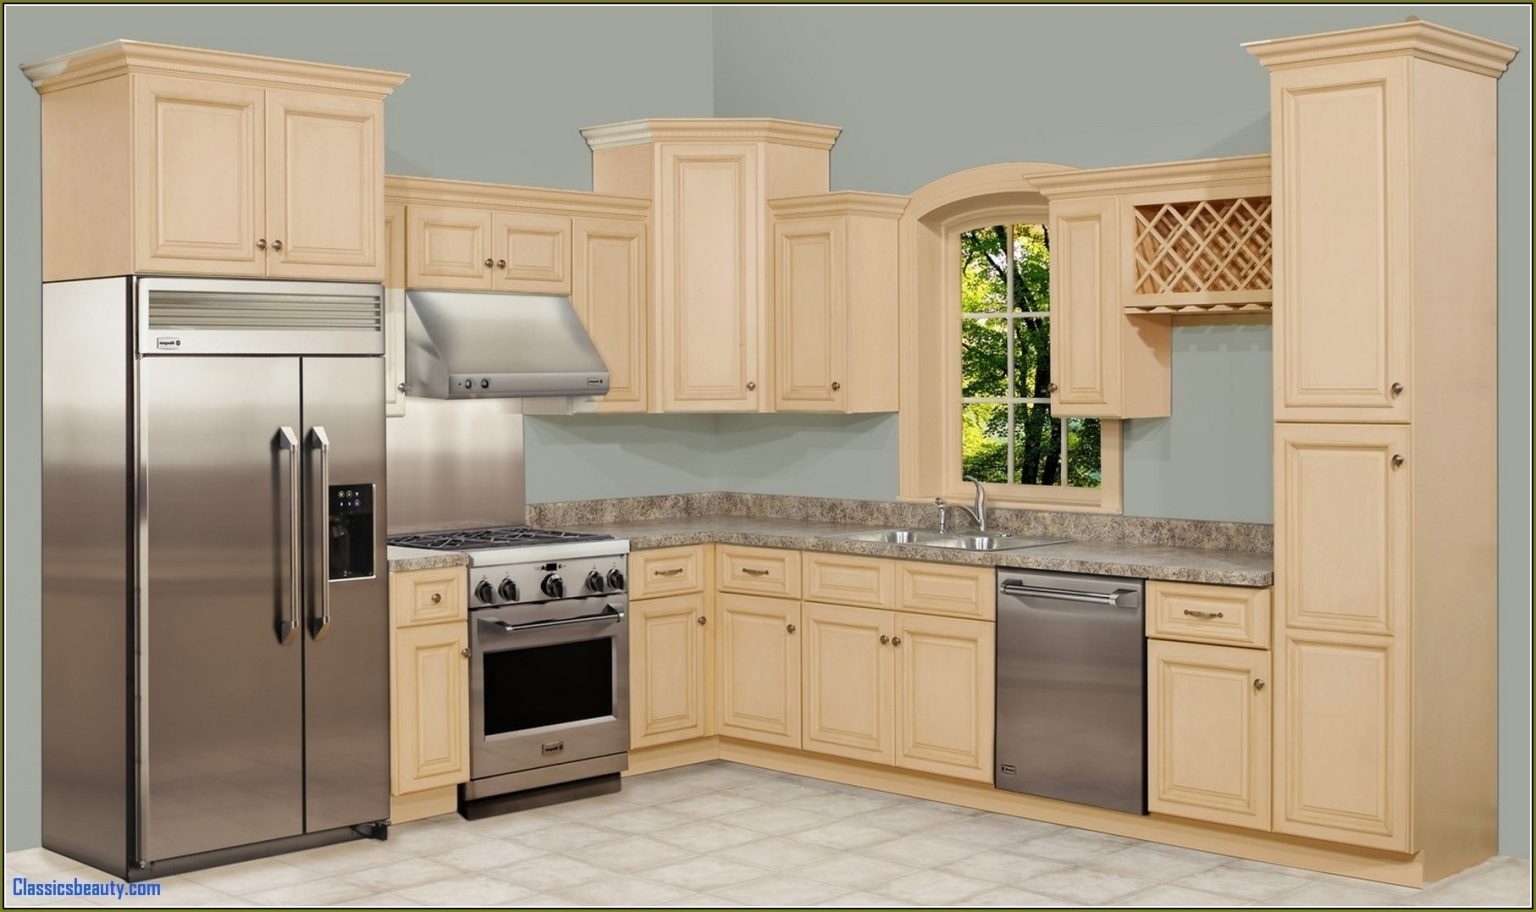  where to purchase unfinished kitchen cabinets